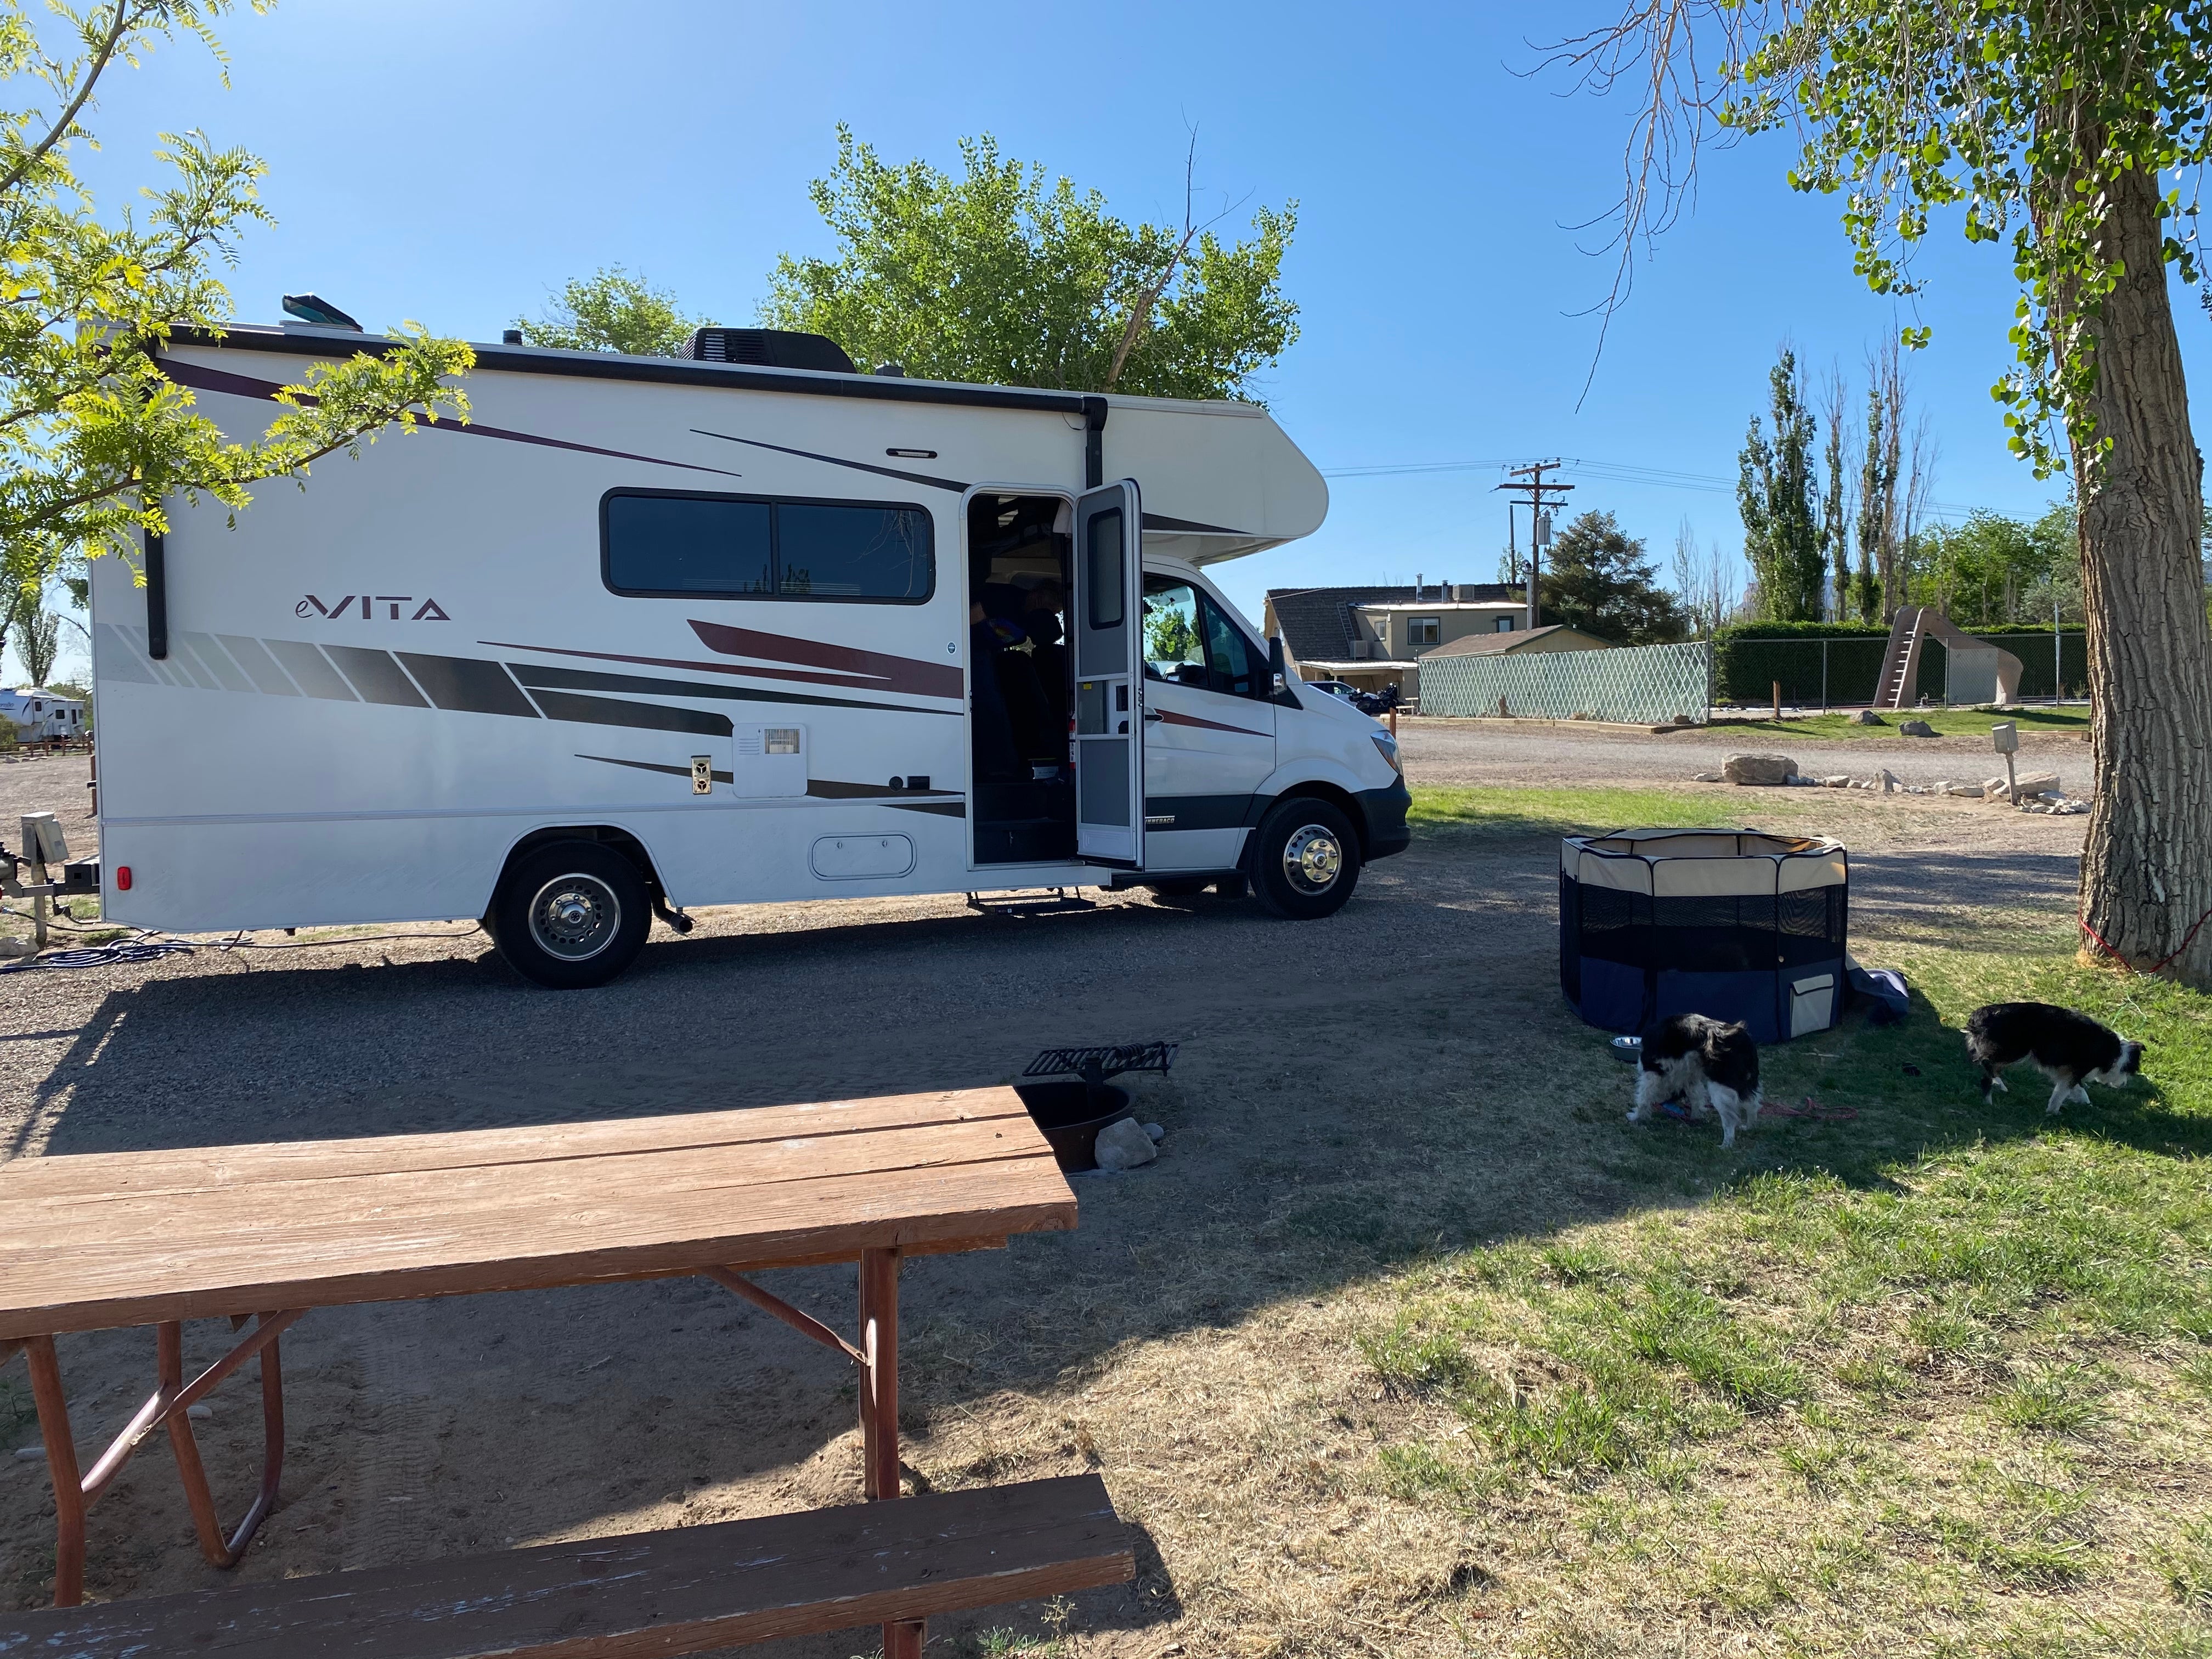 Camper submitted image from Green River KOA - 1